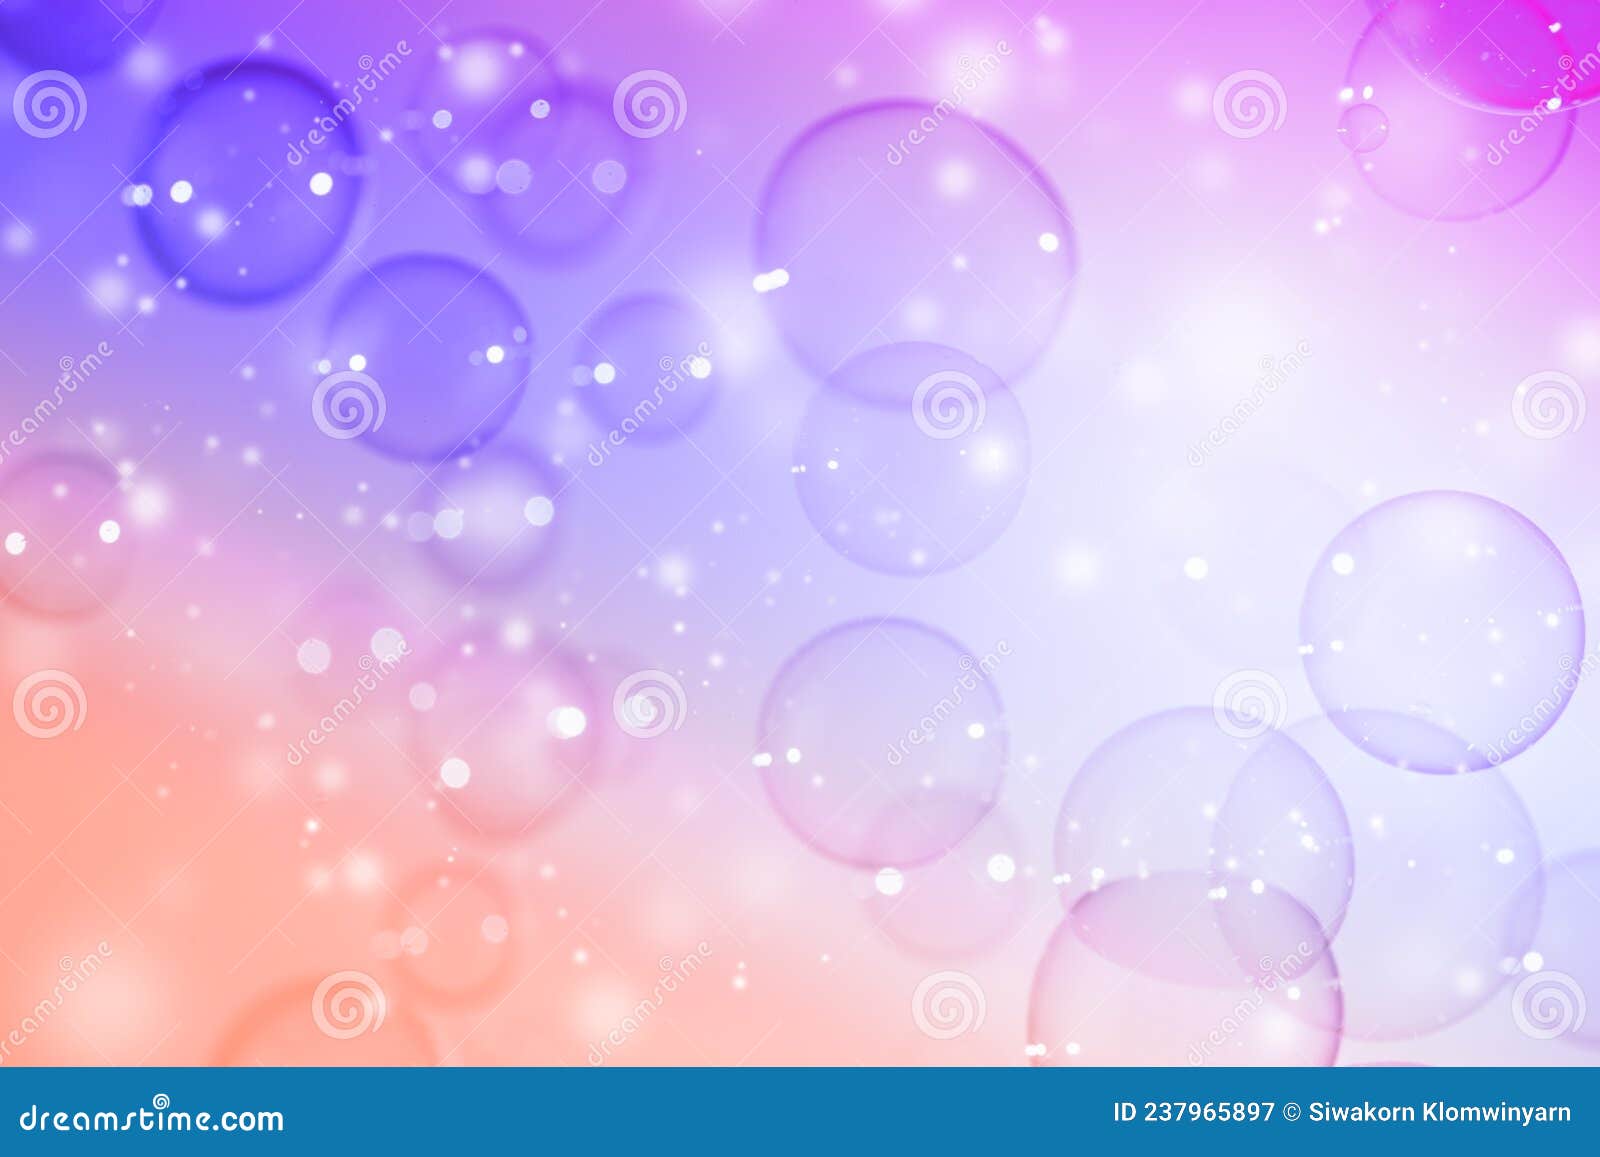 Beautiful Transparent Colorful Purple, Yellow and Pink Soap Bubbles  Background. Celebration, White Bokeh Bubbles Backdrop Stock Image - Image  of beautiful, blue: 237965897